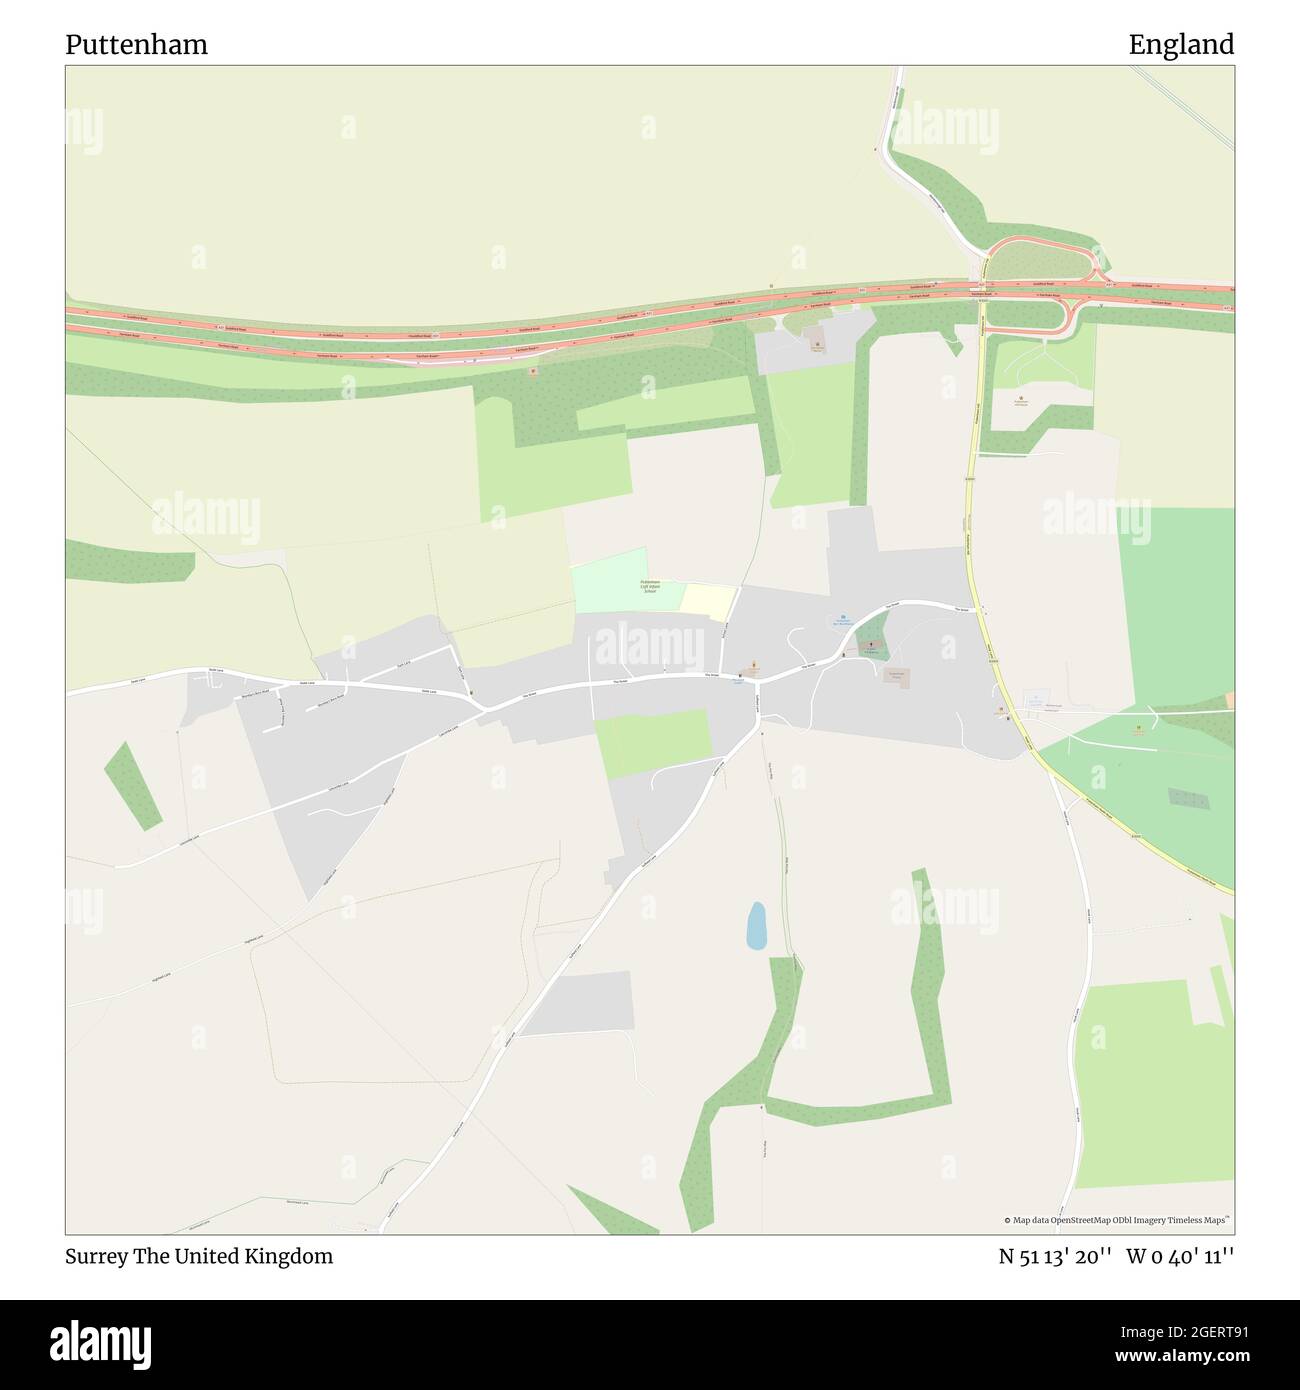 Puttenham, Surrey, United Kingdom, England, N 51 13' 20'', W 0 40' 11'', map, Timeless Map published in 2021. Travelers, explorers and adventurers like Florence Nightingale, David Livingstone, Ernest Shackleton, Lewis and Clark and Sherlock Holmes relied on maps to plan travels to the world's most remote corners, Timeless Maps is mapping most locations on the globe, showing the achievement of great dreams Stock Photo